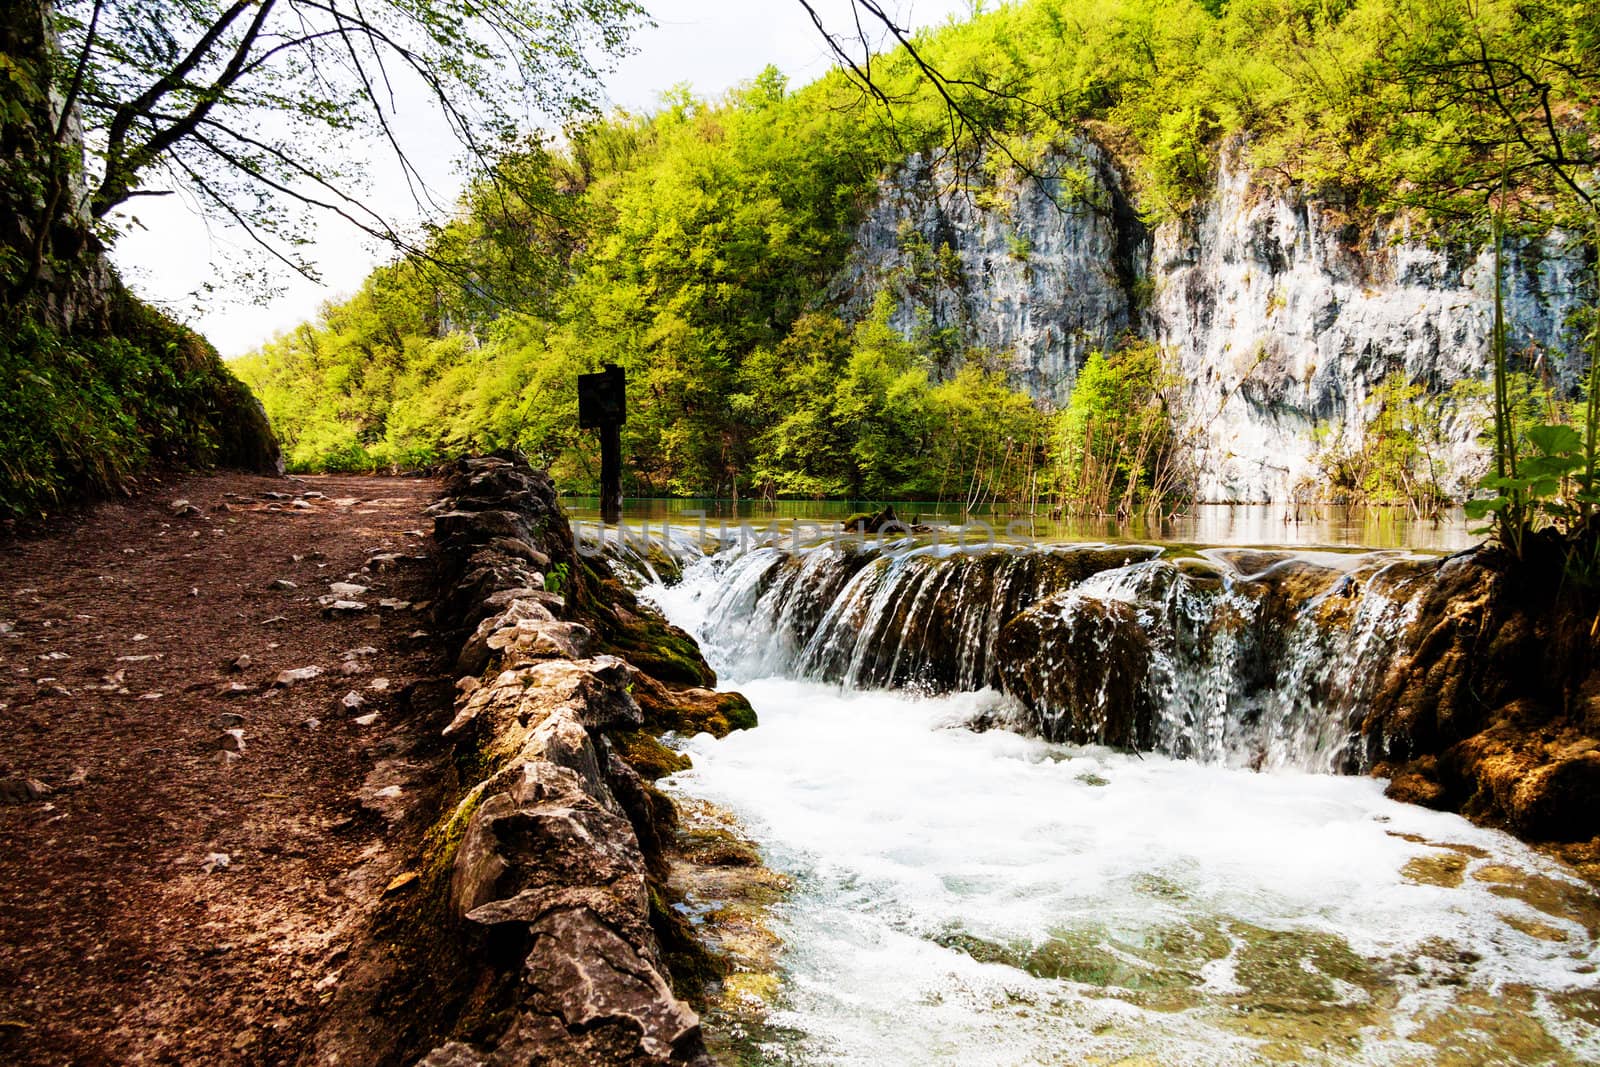 Beaten track near a forest lake and waterfall in Plitvice Lakes  by Lamarinx